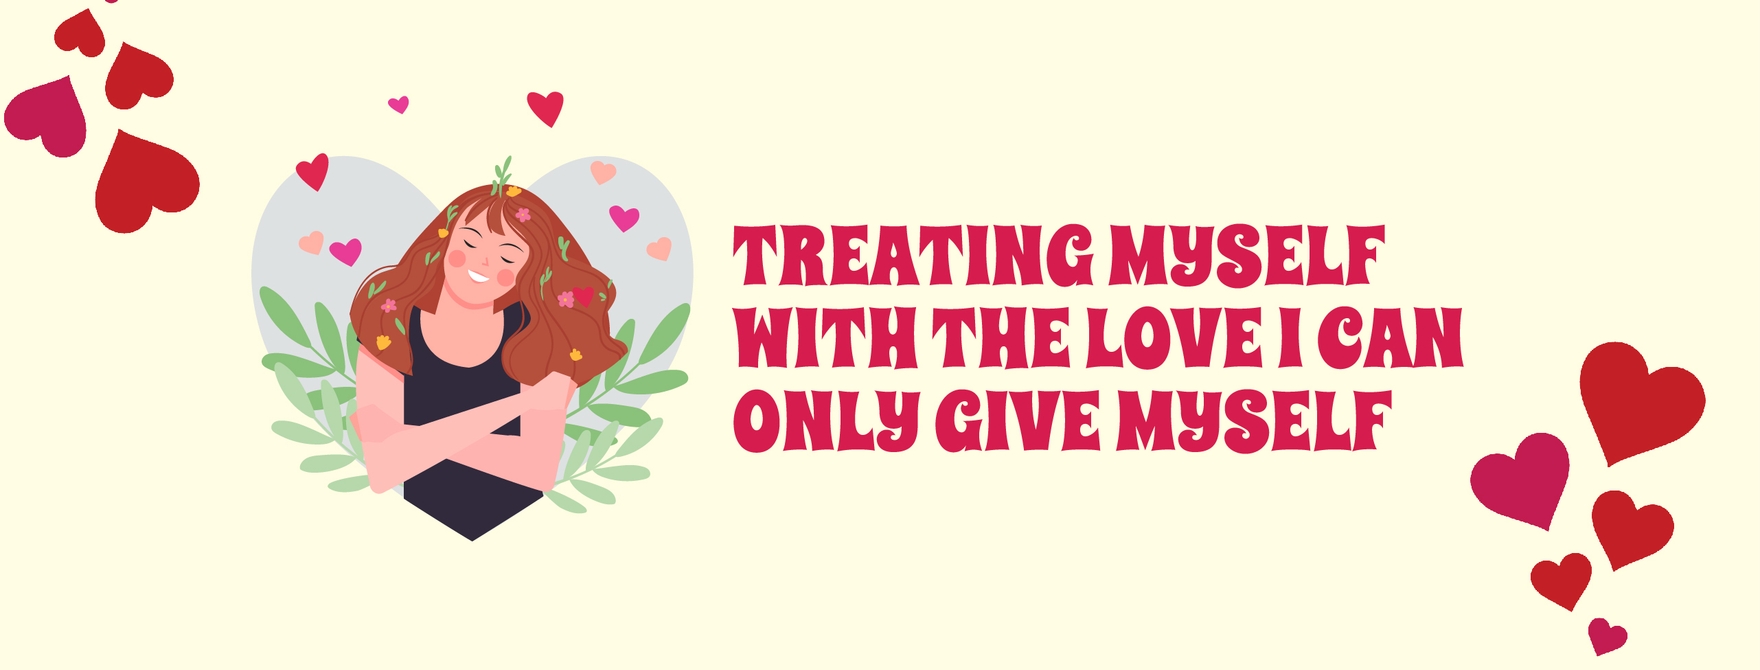 Valentine's Day Facebook Cover Banner